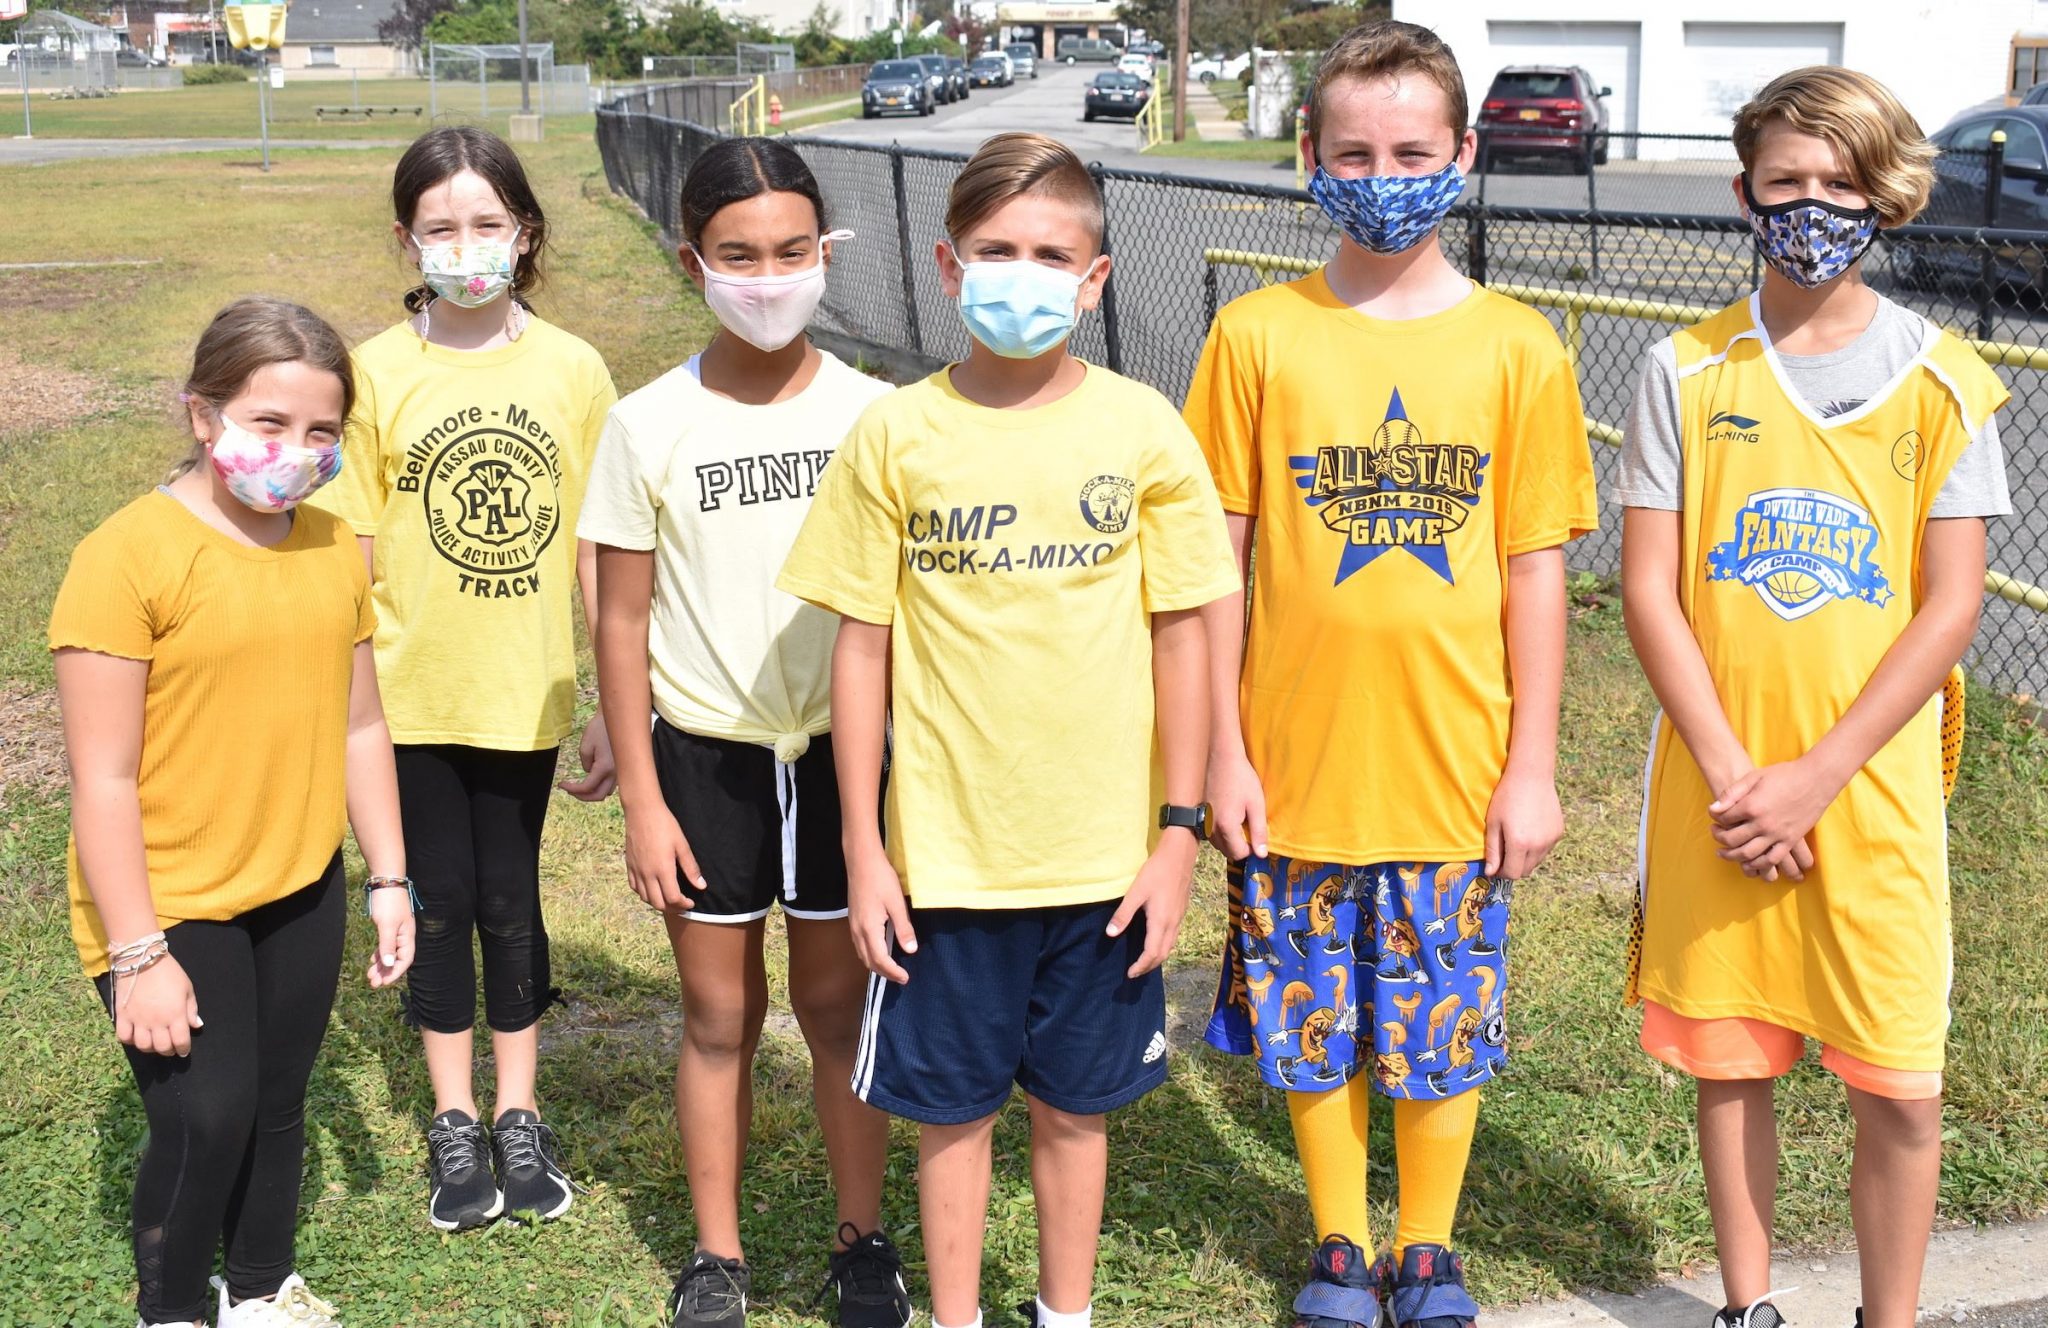 north-bellmore-students-have-hearts-of-gold-team-up-4-community